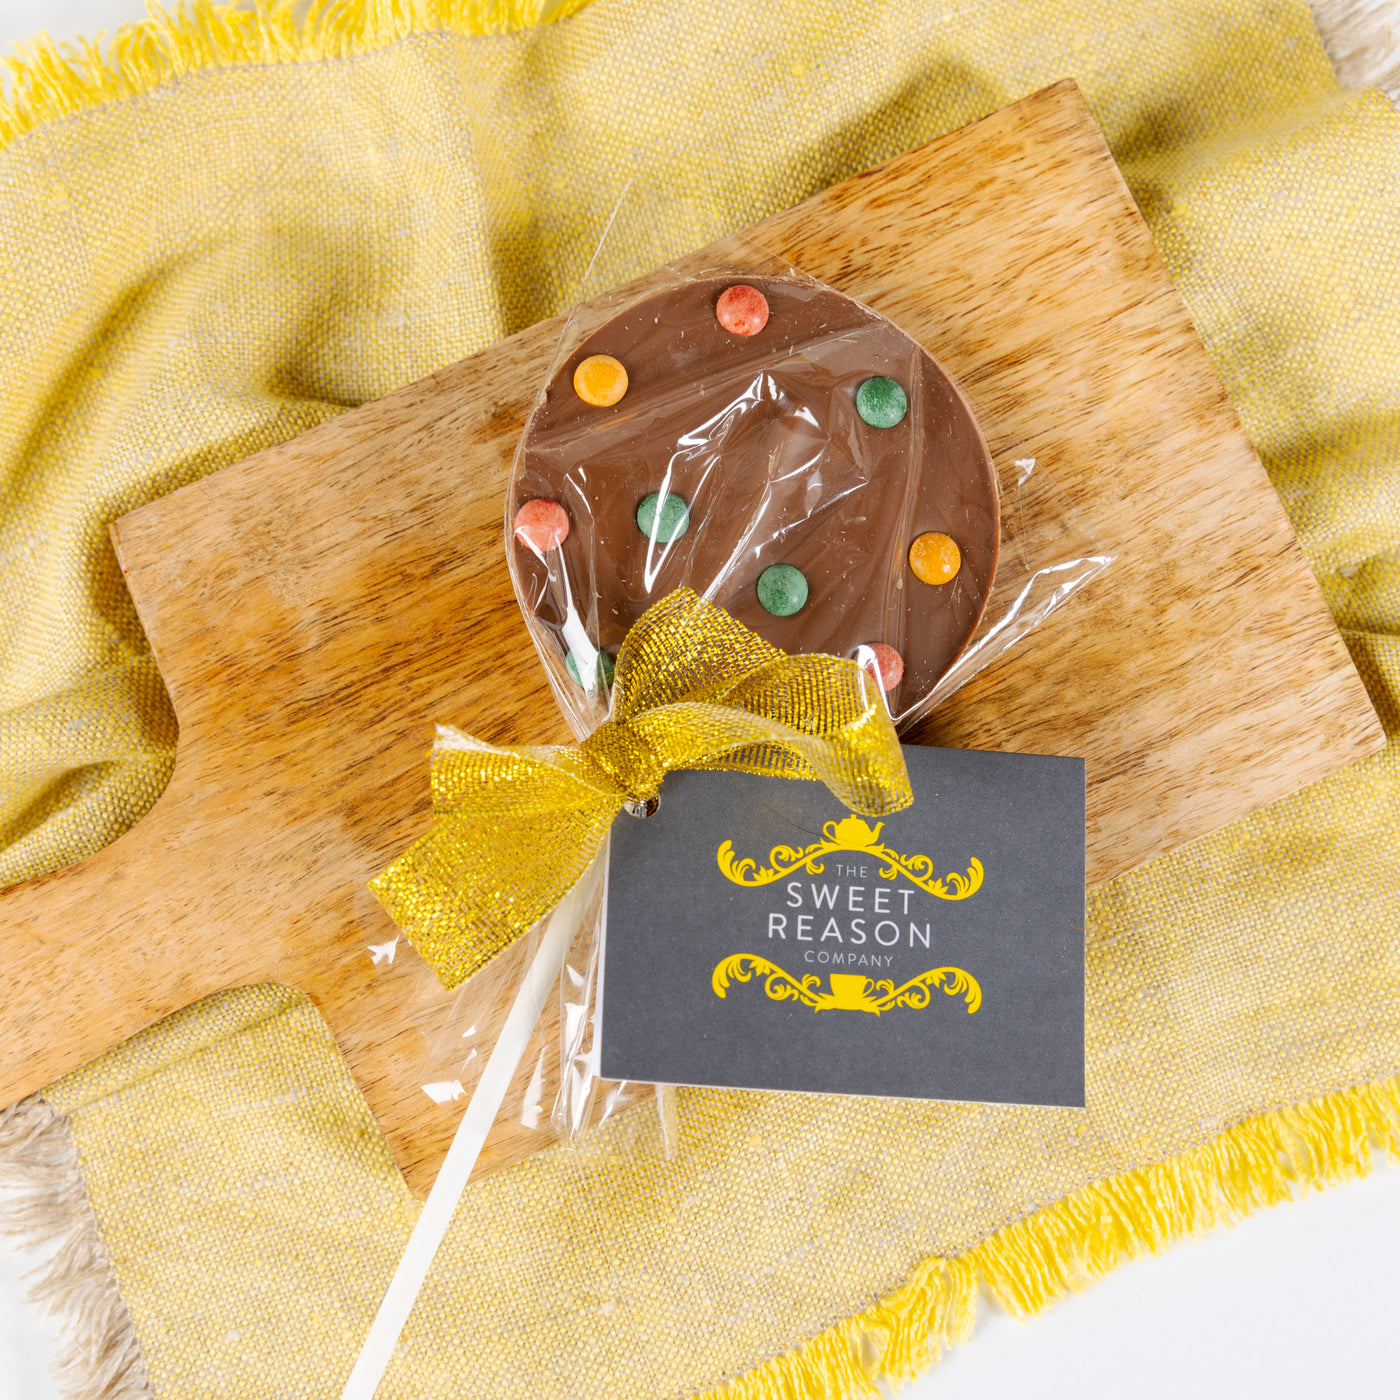 Luxury Chocolate & Candy Bean Lolly